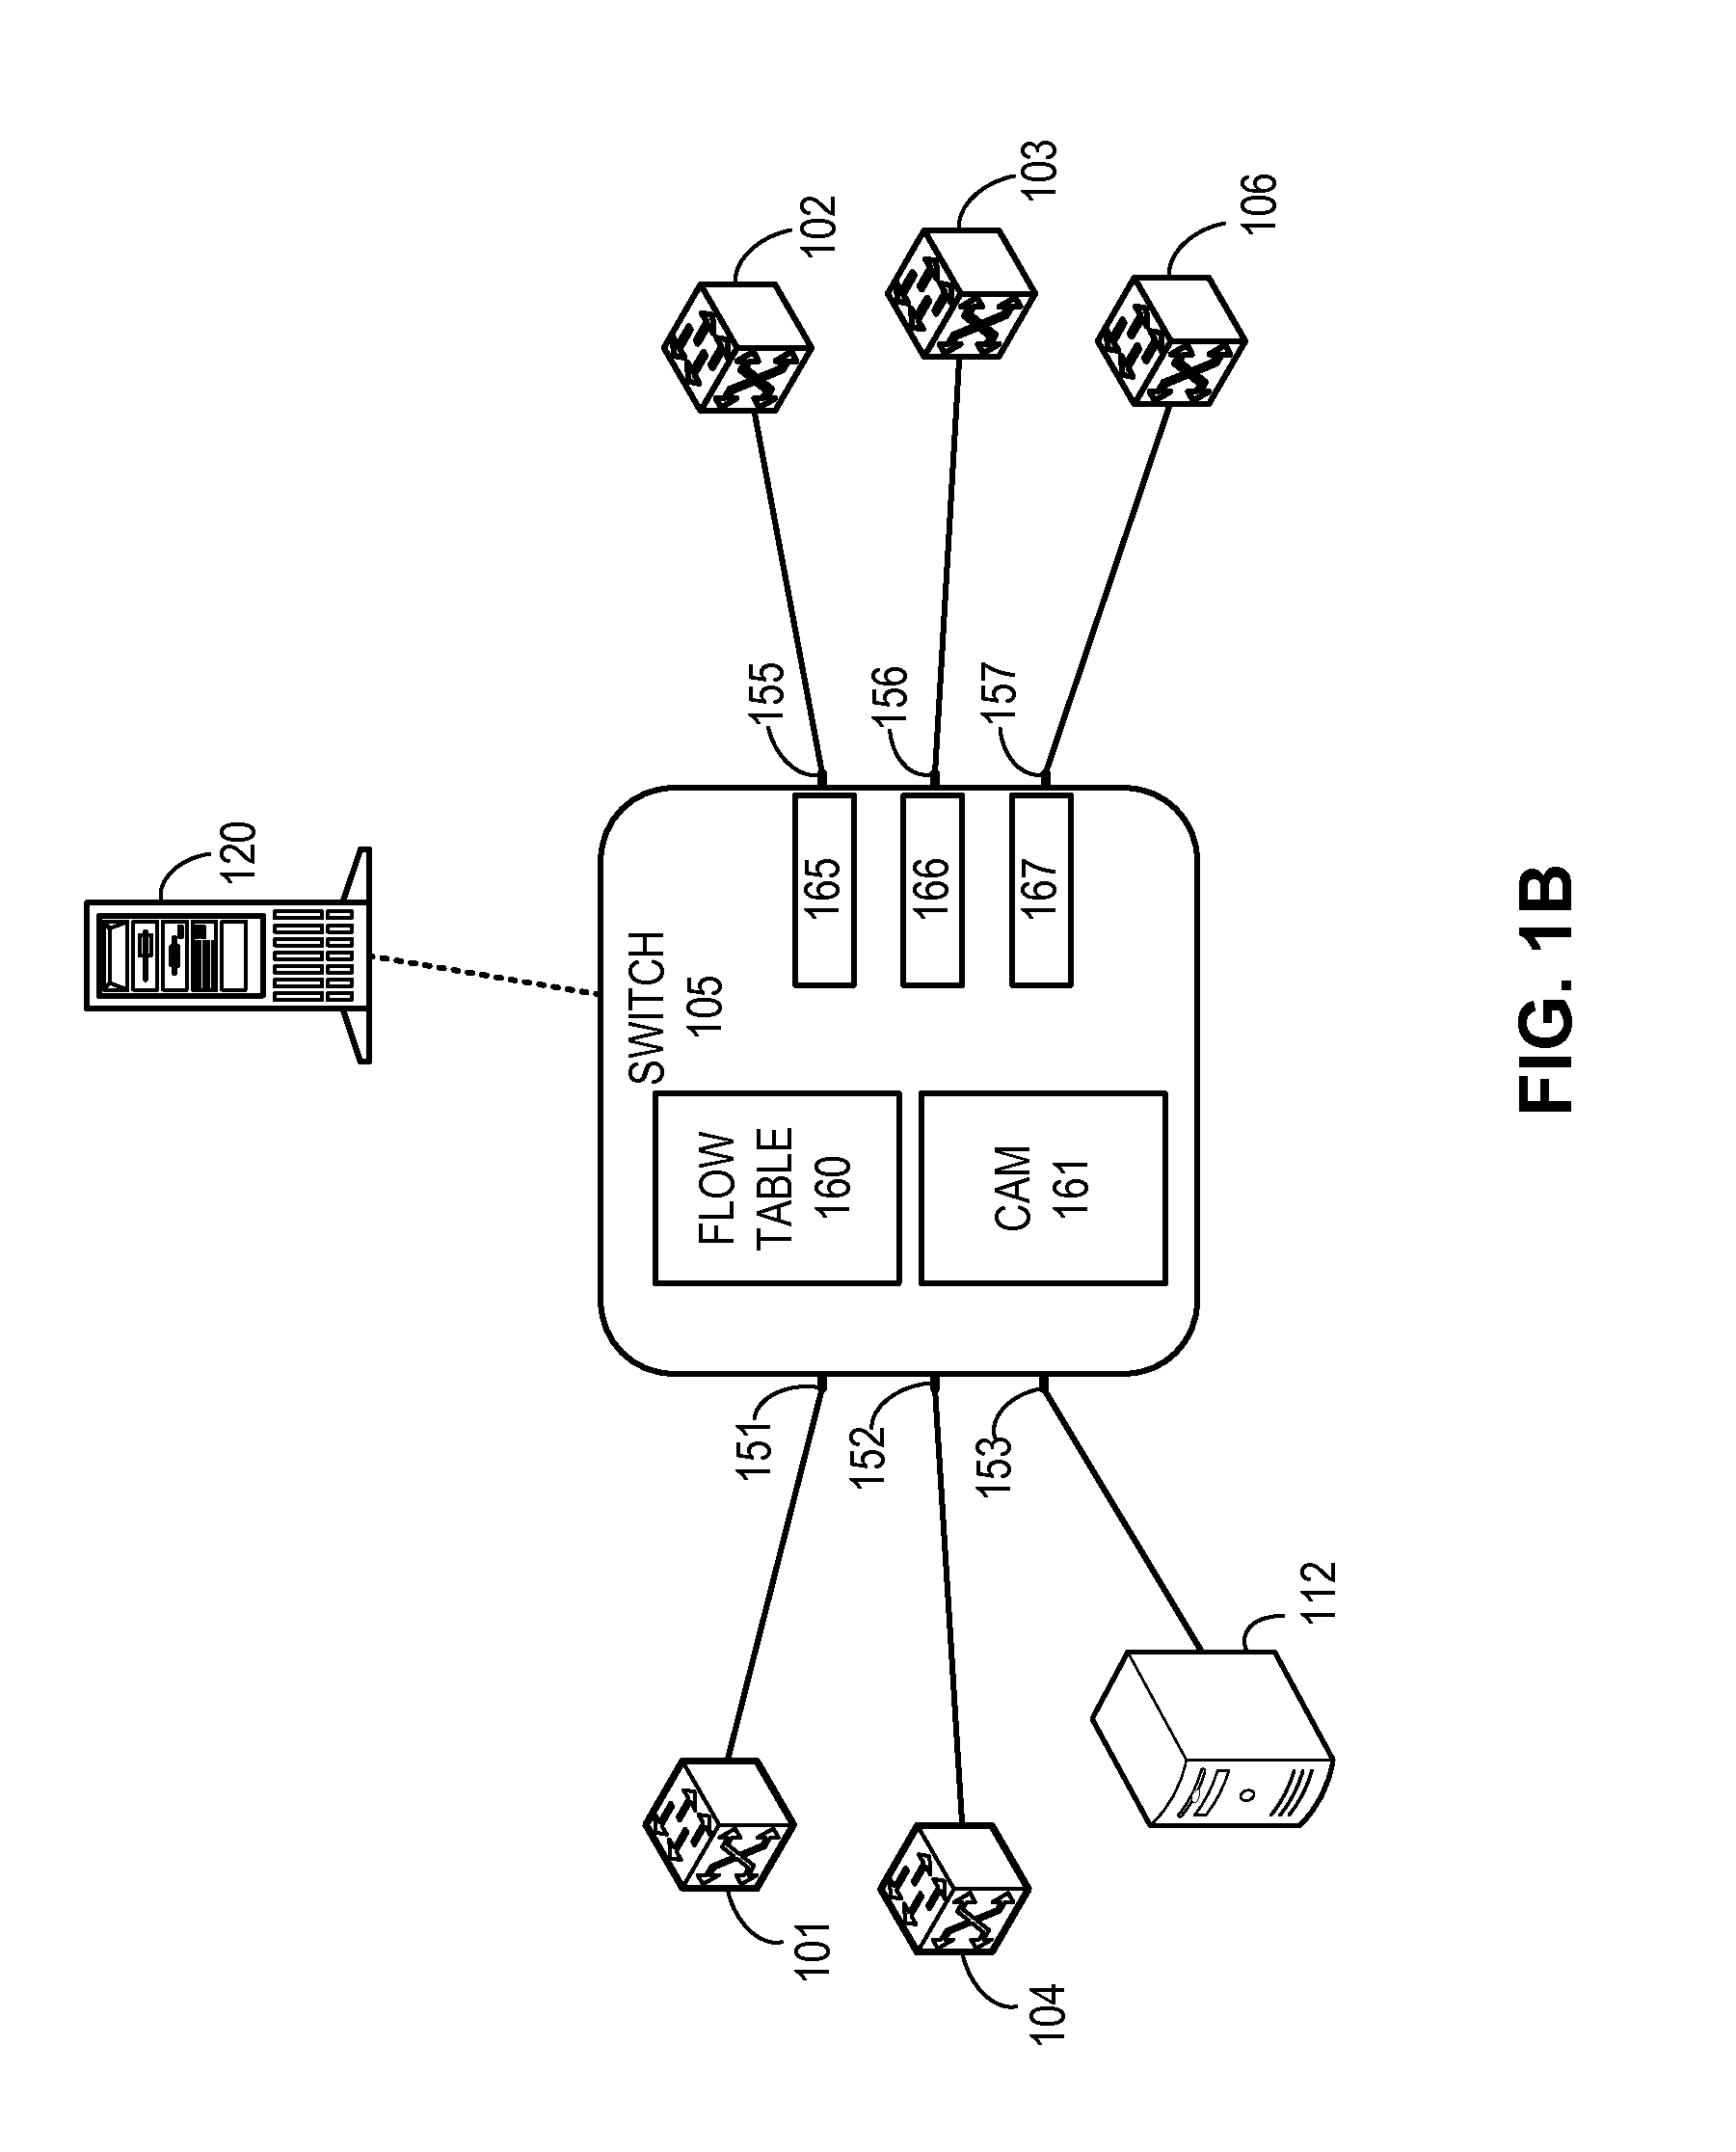 System and method for flow management in software-defined networks